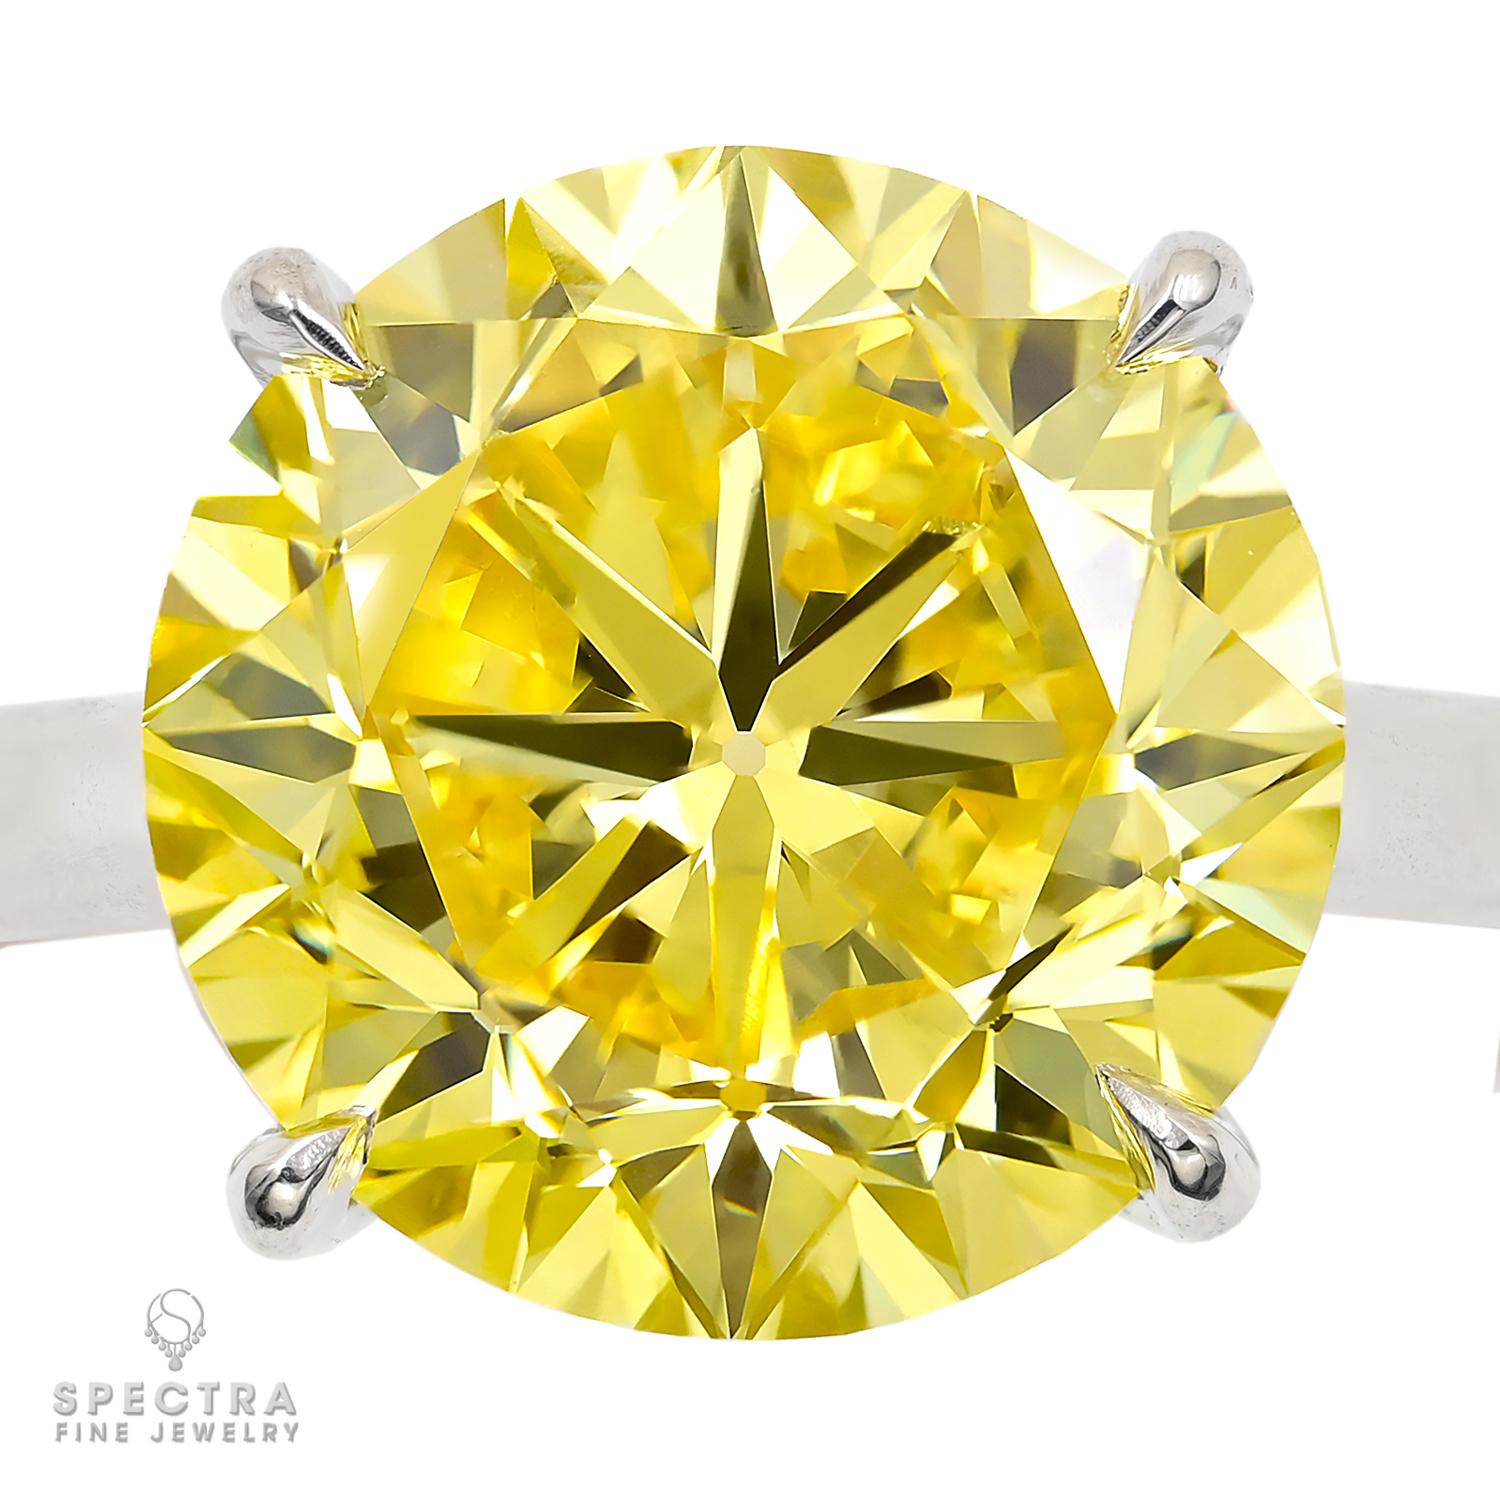 Contemporary Spectra Fine Jewelry GIA Certified 2.37 Carat Vivid Yellow Diamond Ring For Sale